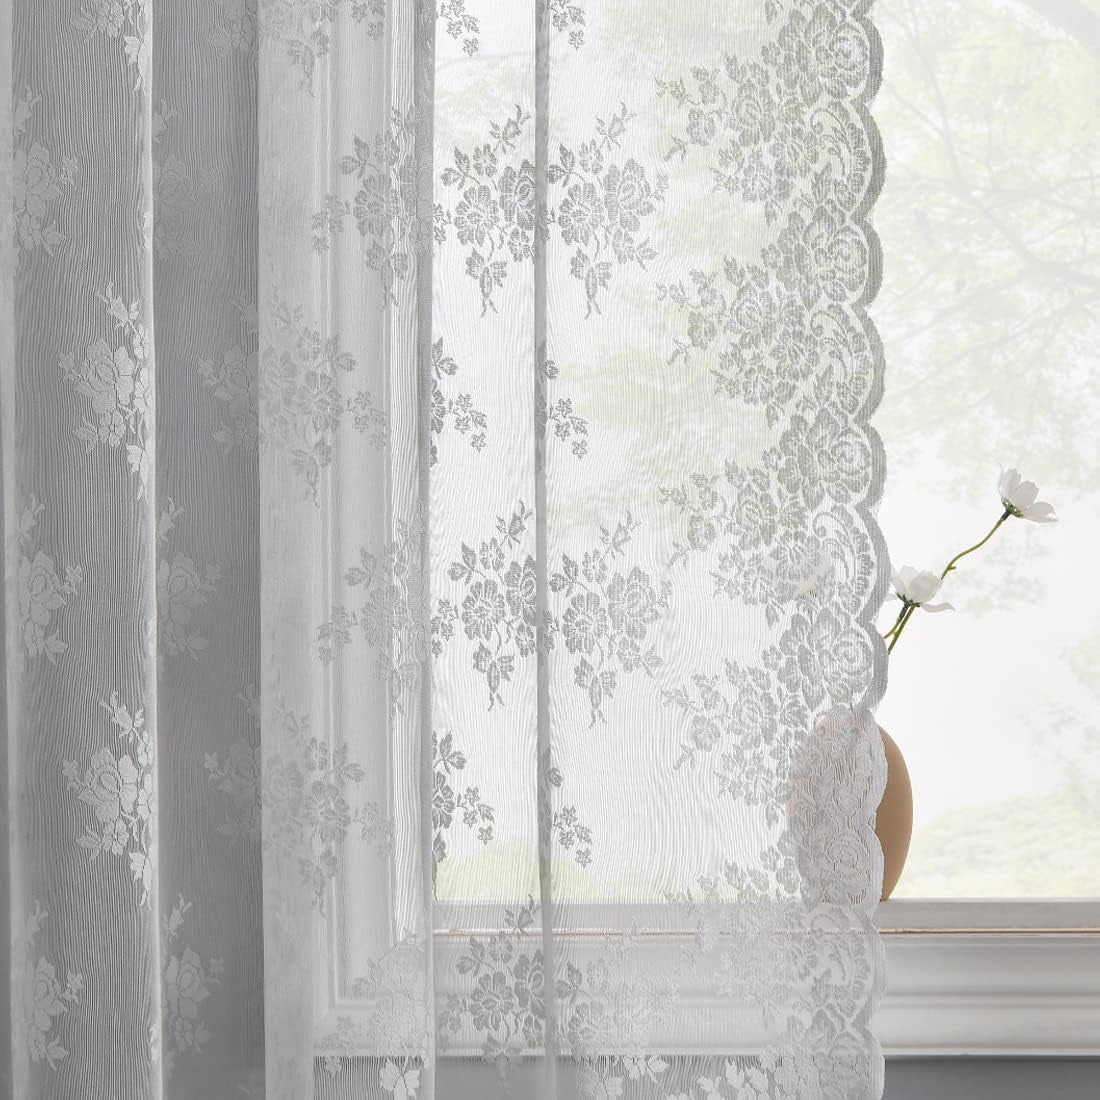 Kotile Sage Green Sheer Valance Curtain for Windows, Rustic Floral Spring Sheer Window Valance Curtain 18 Inch Length, Light Filtering Rod Pocket Lace Valance, 52 X 18 Inch, 1 Panel, Sage Green  Kotile Textile Grey 52 In X 72 In (W X L) 